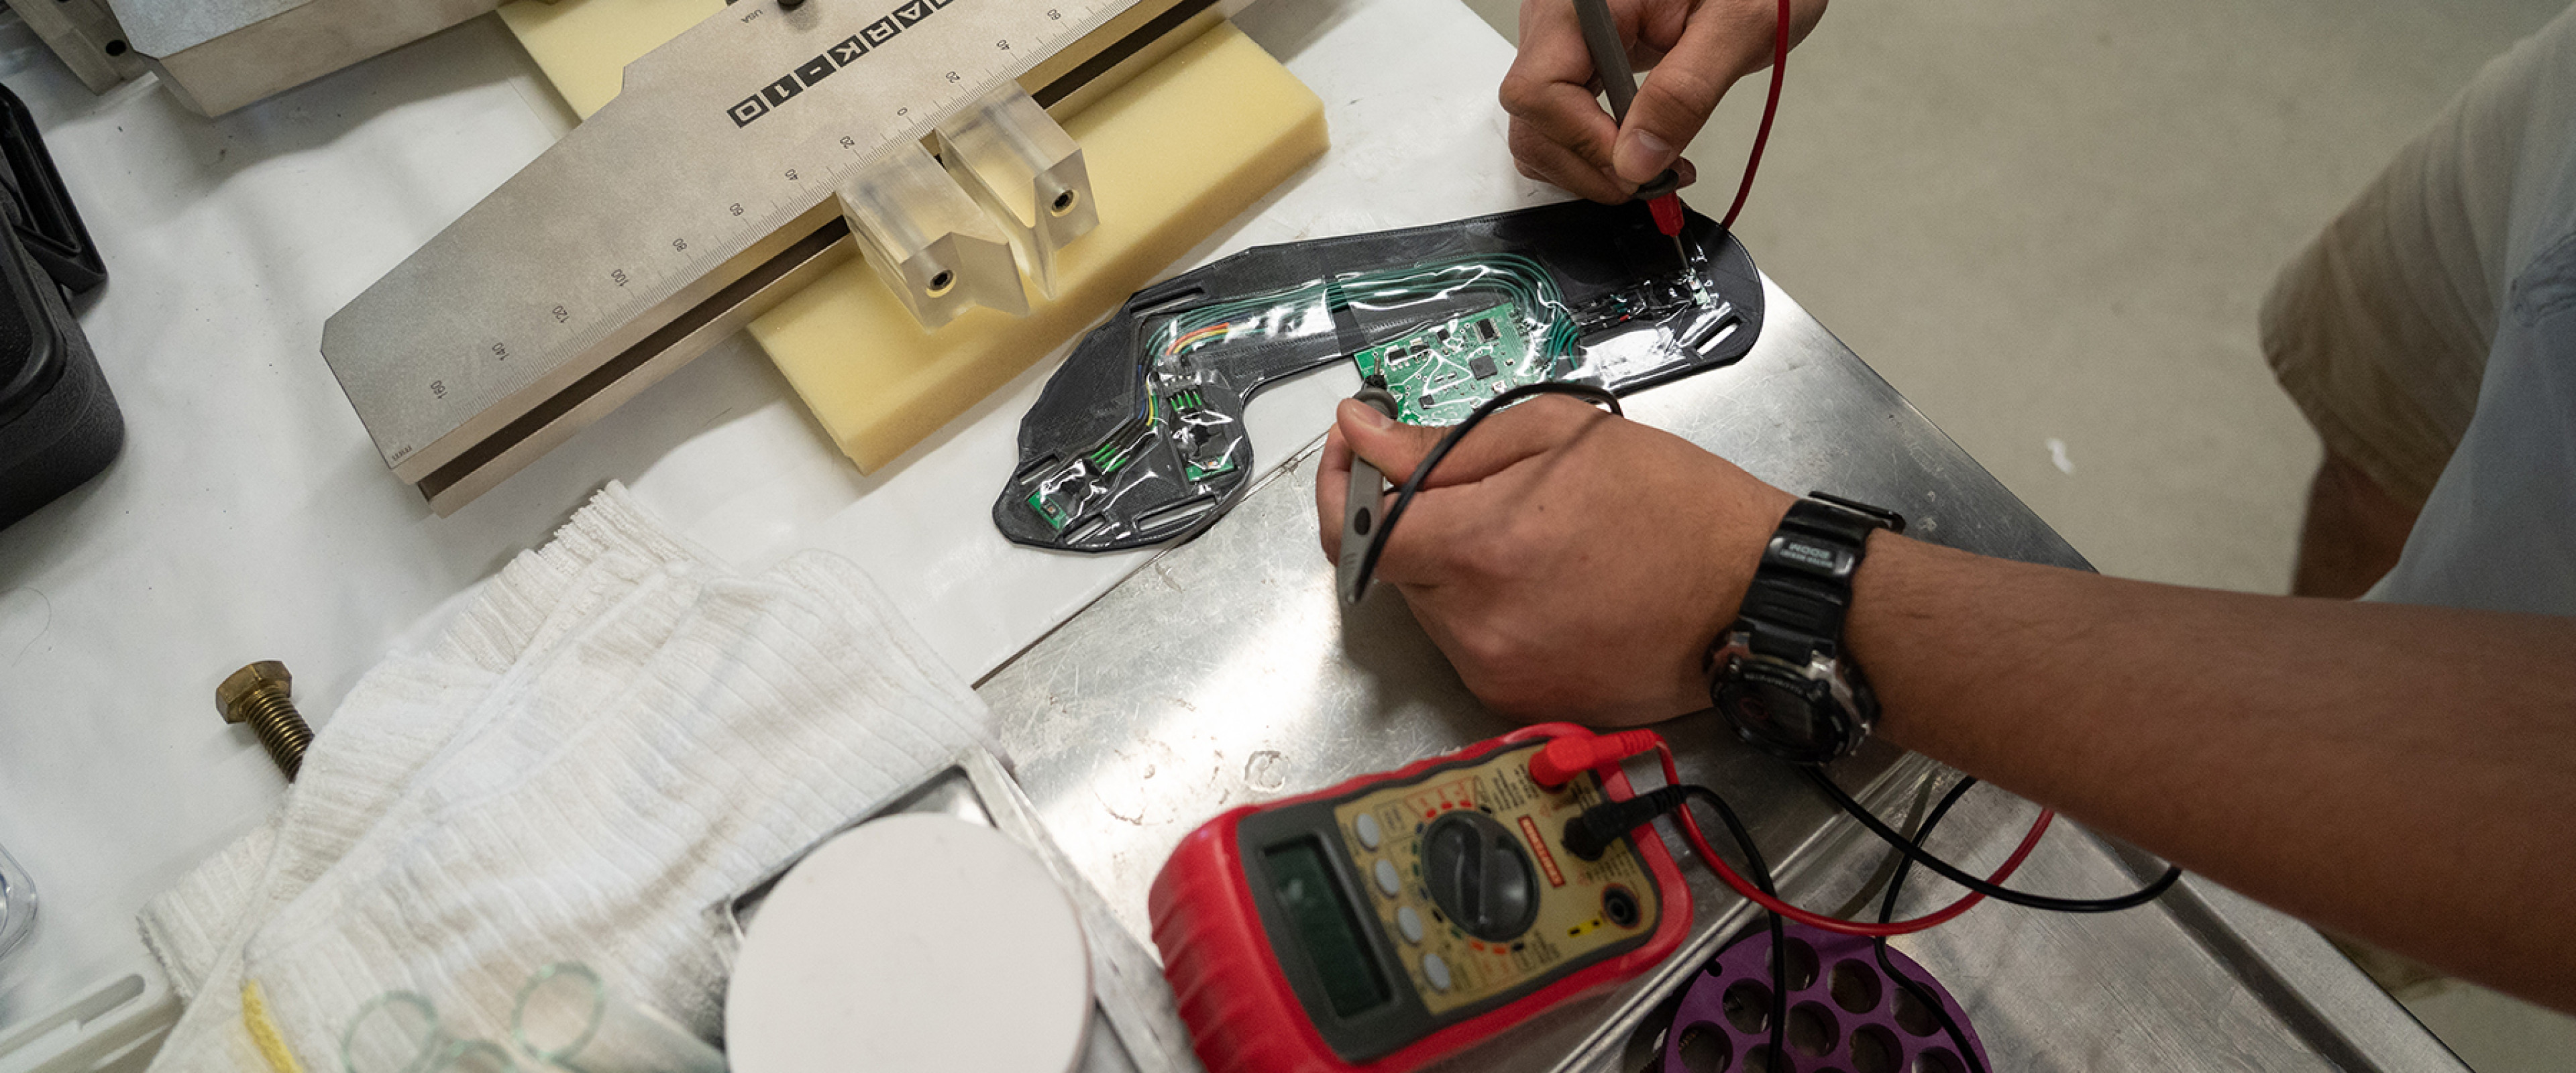 student in the electrical and computer engineering department working on a project